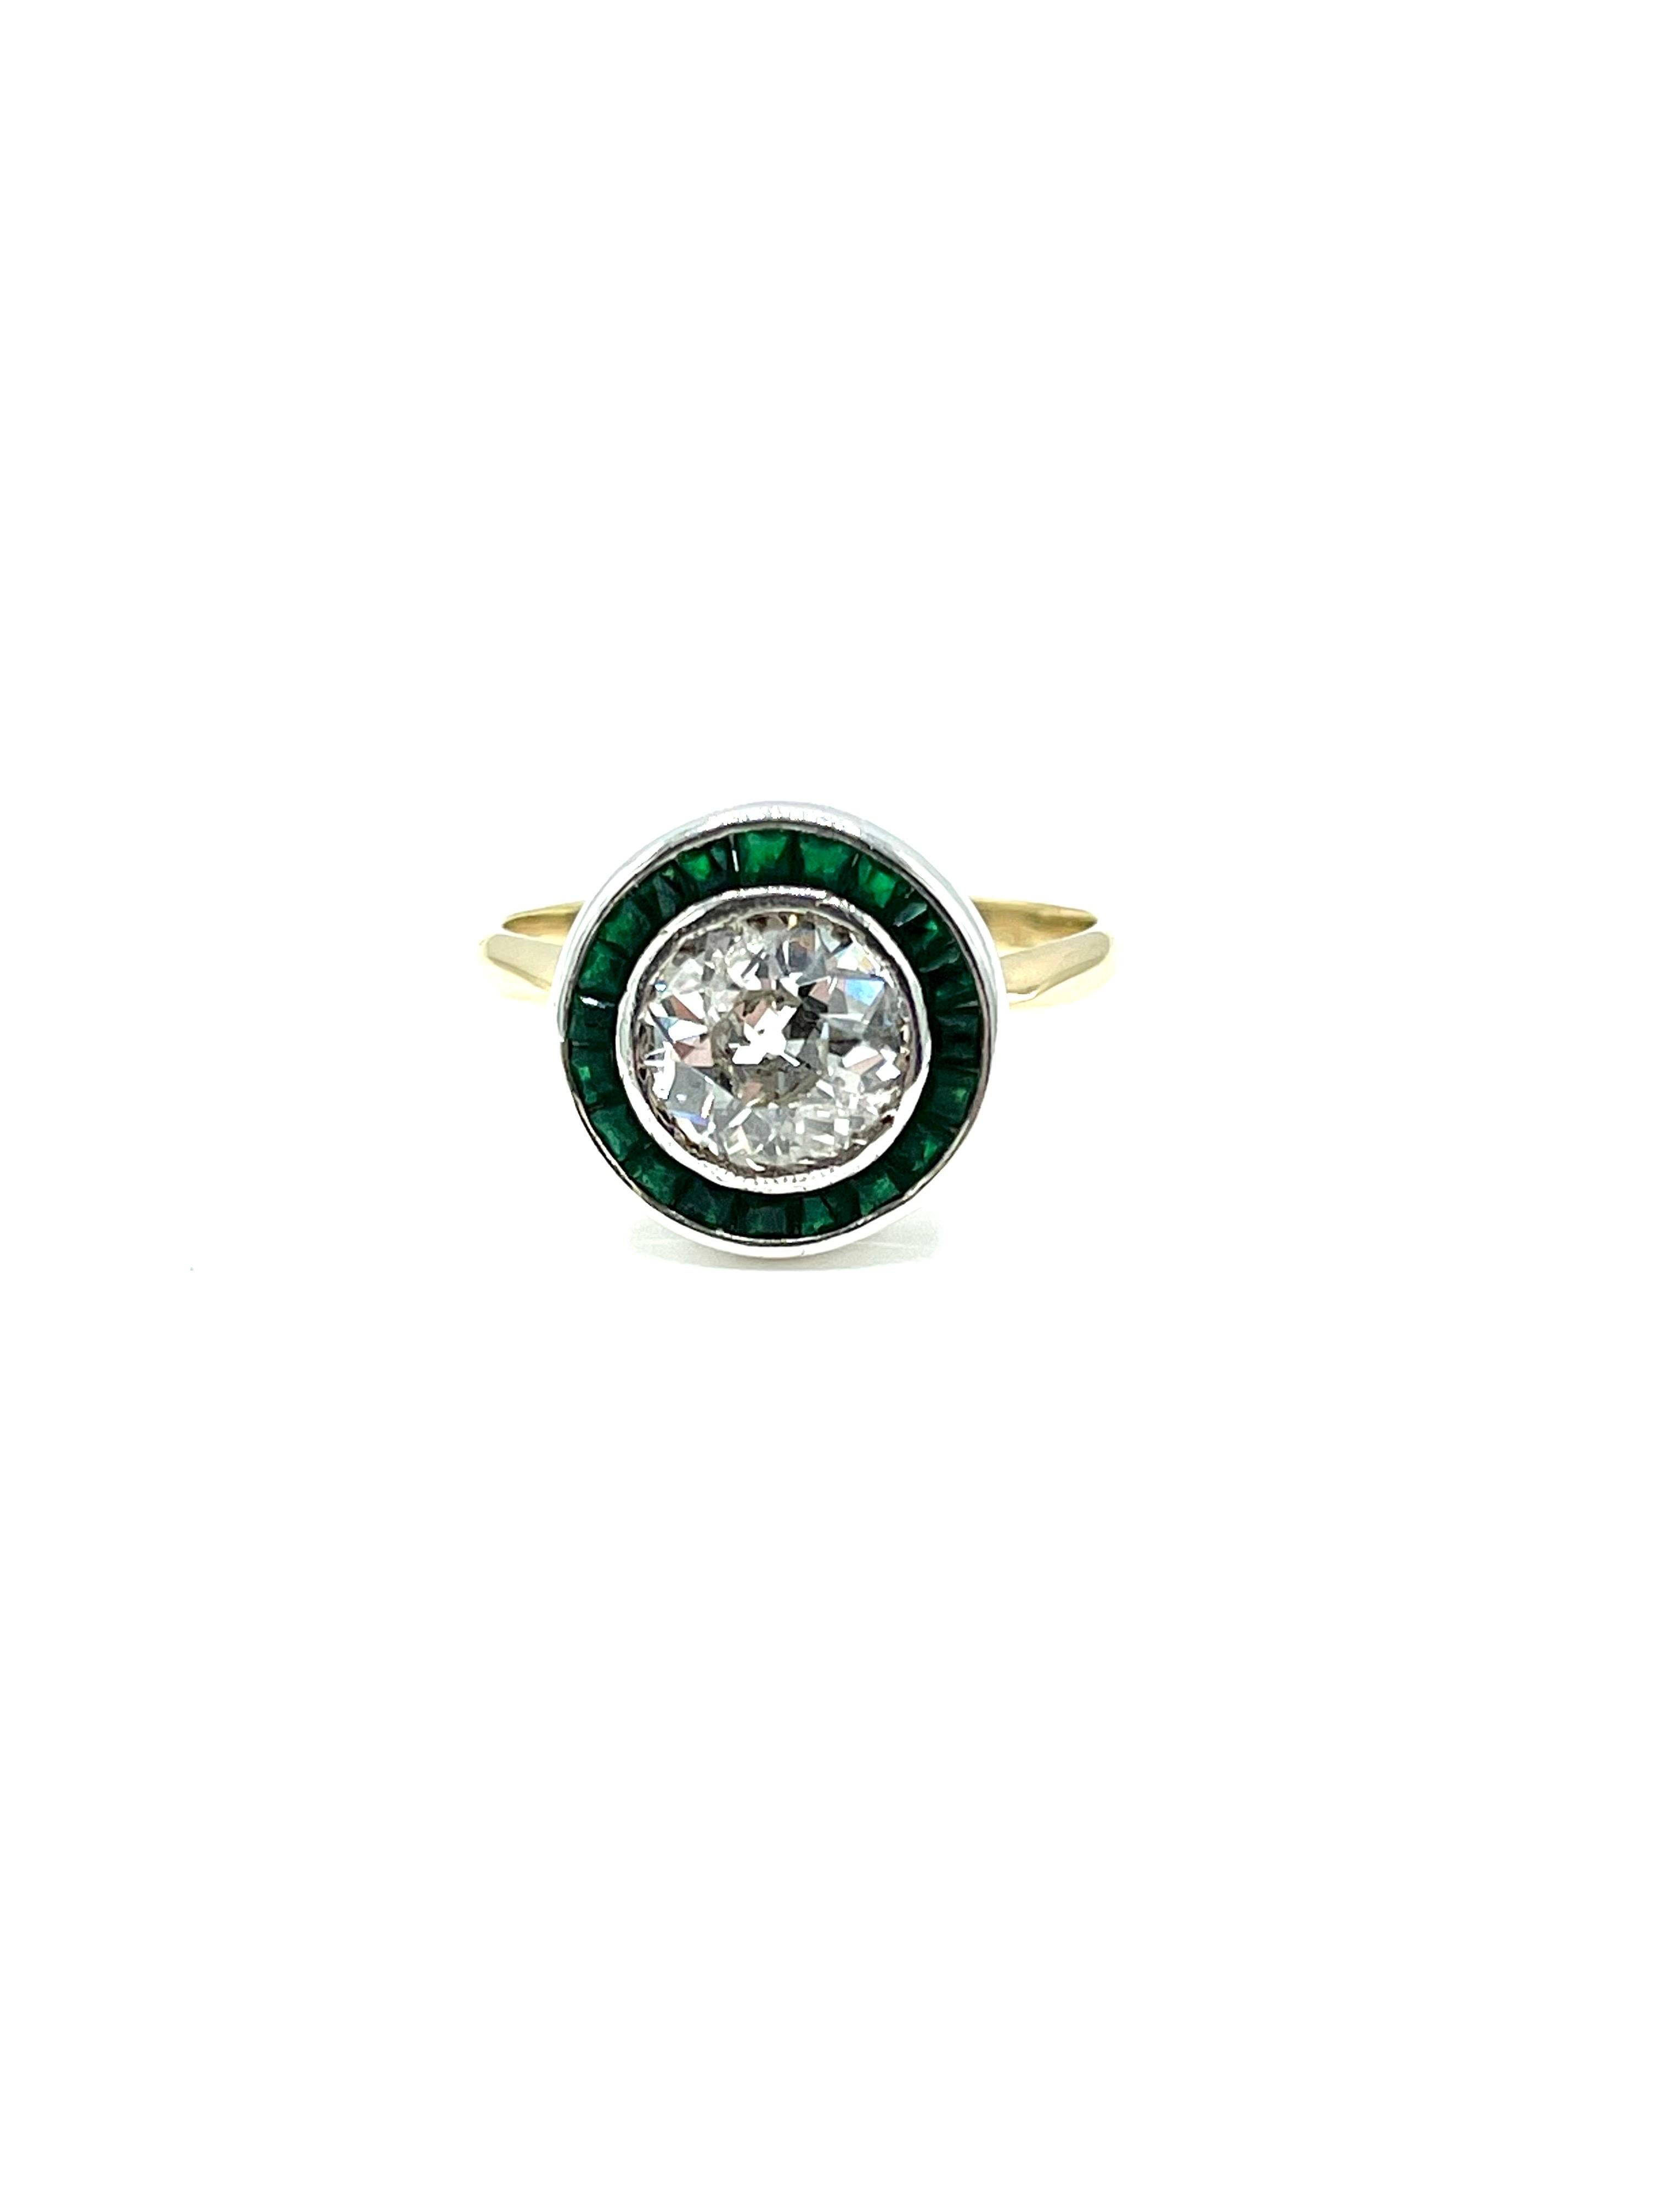 A beautiful French made old European cut Diamond engagement ring!  The ring is designed with a bezel set 1.56 carat old European cut Diamond, surrounded by a single row of square cut Emeralds, set in platinum, with an 18K yellow gold shank. The